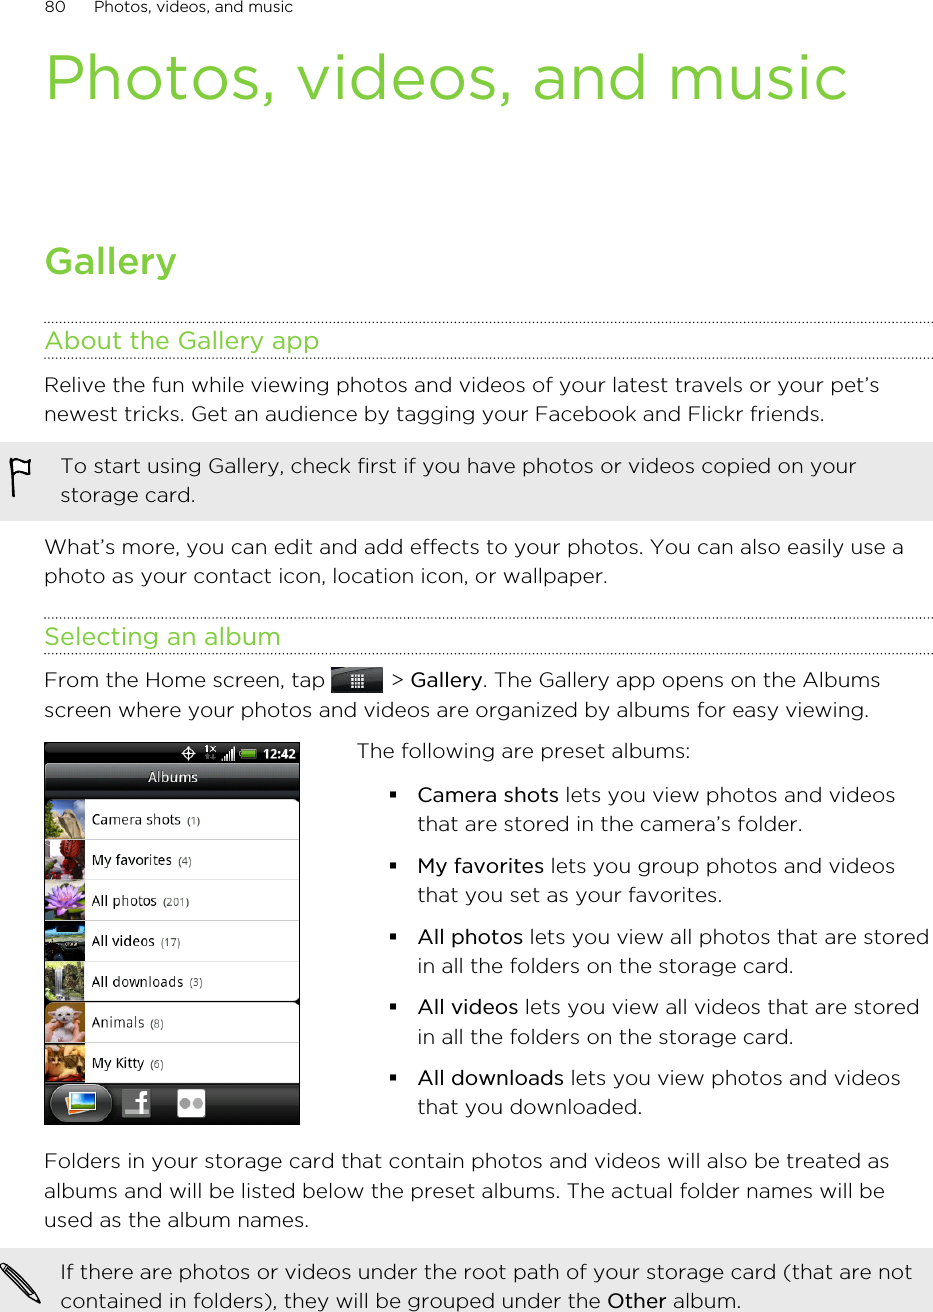 Photos, videos, and musicGalleryAbout the Gallery appRelive the fun while viewing photos and videos of your latest travels or your pet’snewest tricks. Get an audience by tagging your Facebook and Flickr friends.To start using Gallery, check first if you have photos or videos copied on yourstorage card.What’s more, you can edit and add effects to your photos. You can also easily use aphoto as your contact icon, location icon, or wallpaper.Selecting an albumFrom the Home screen, tap   &gt; Gallery. The Gallery app opens on the Albumsscreen where your photos and videos are organized by albums for easy viewing.The following are preset albums:§Camera shots lets you view photos and videosthat are stored in the camera’s folder.§My favorites lets you group photos and videosthat you set as your favorites.§All photos lets you view all photos that are storedin all the folders on the storage card.§All videos lets you view all videos that are storedin all the folders on the storage card.§All downloads lets you view photos and videosthat you downloaded.Folders in your storage card that contain photos and videos will also be treated asalbums and will be listed below the preset albums. The actual folder names will beused as the album names.If there are photos or videos under the root path of your storage card (that are notcontained in folders), they will be grouped under the Other album.80 Photos, videos, and music